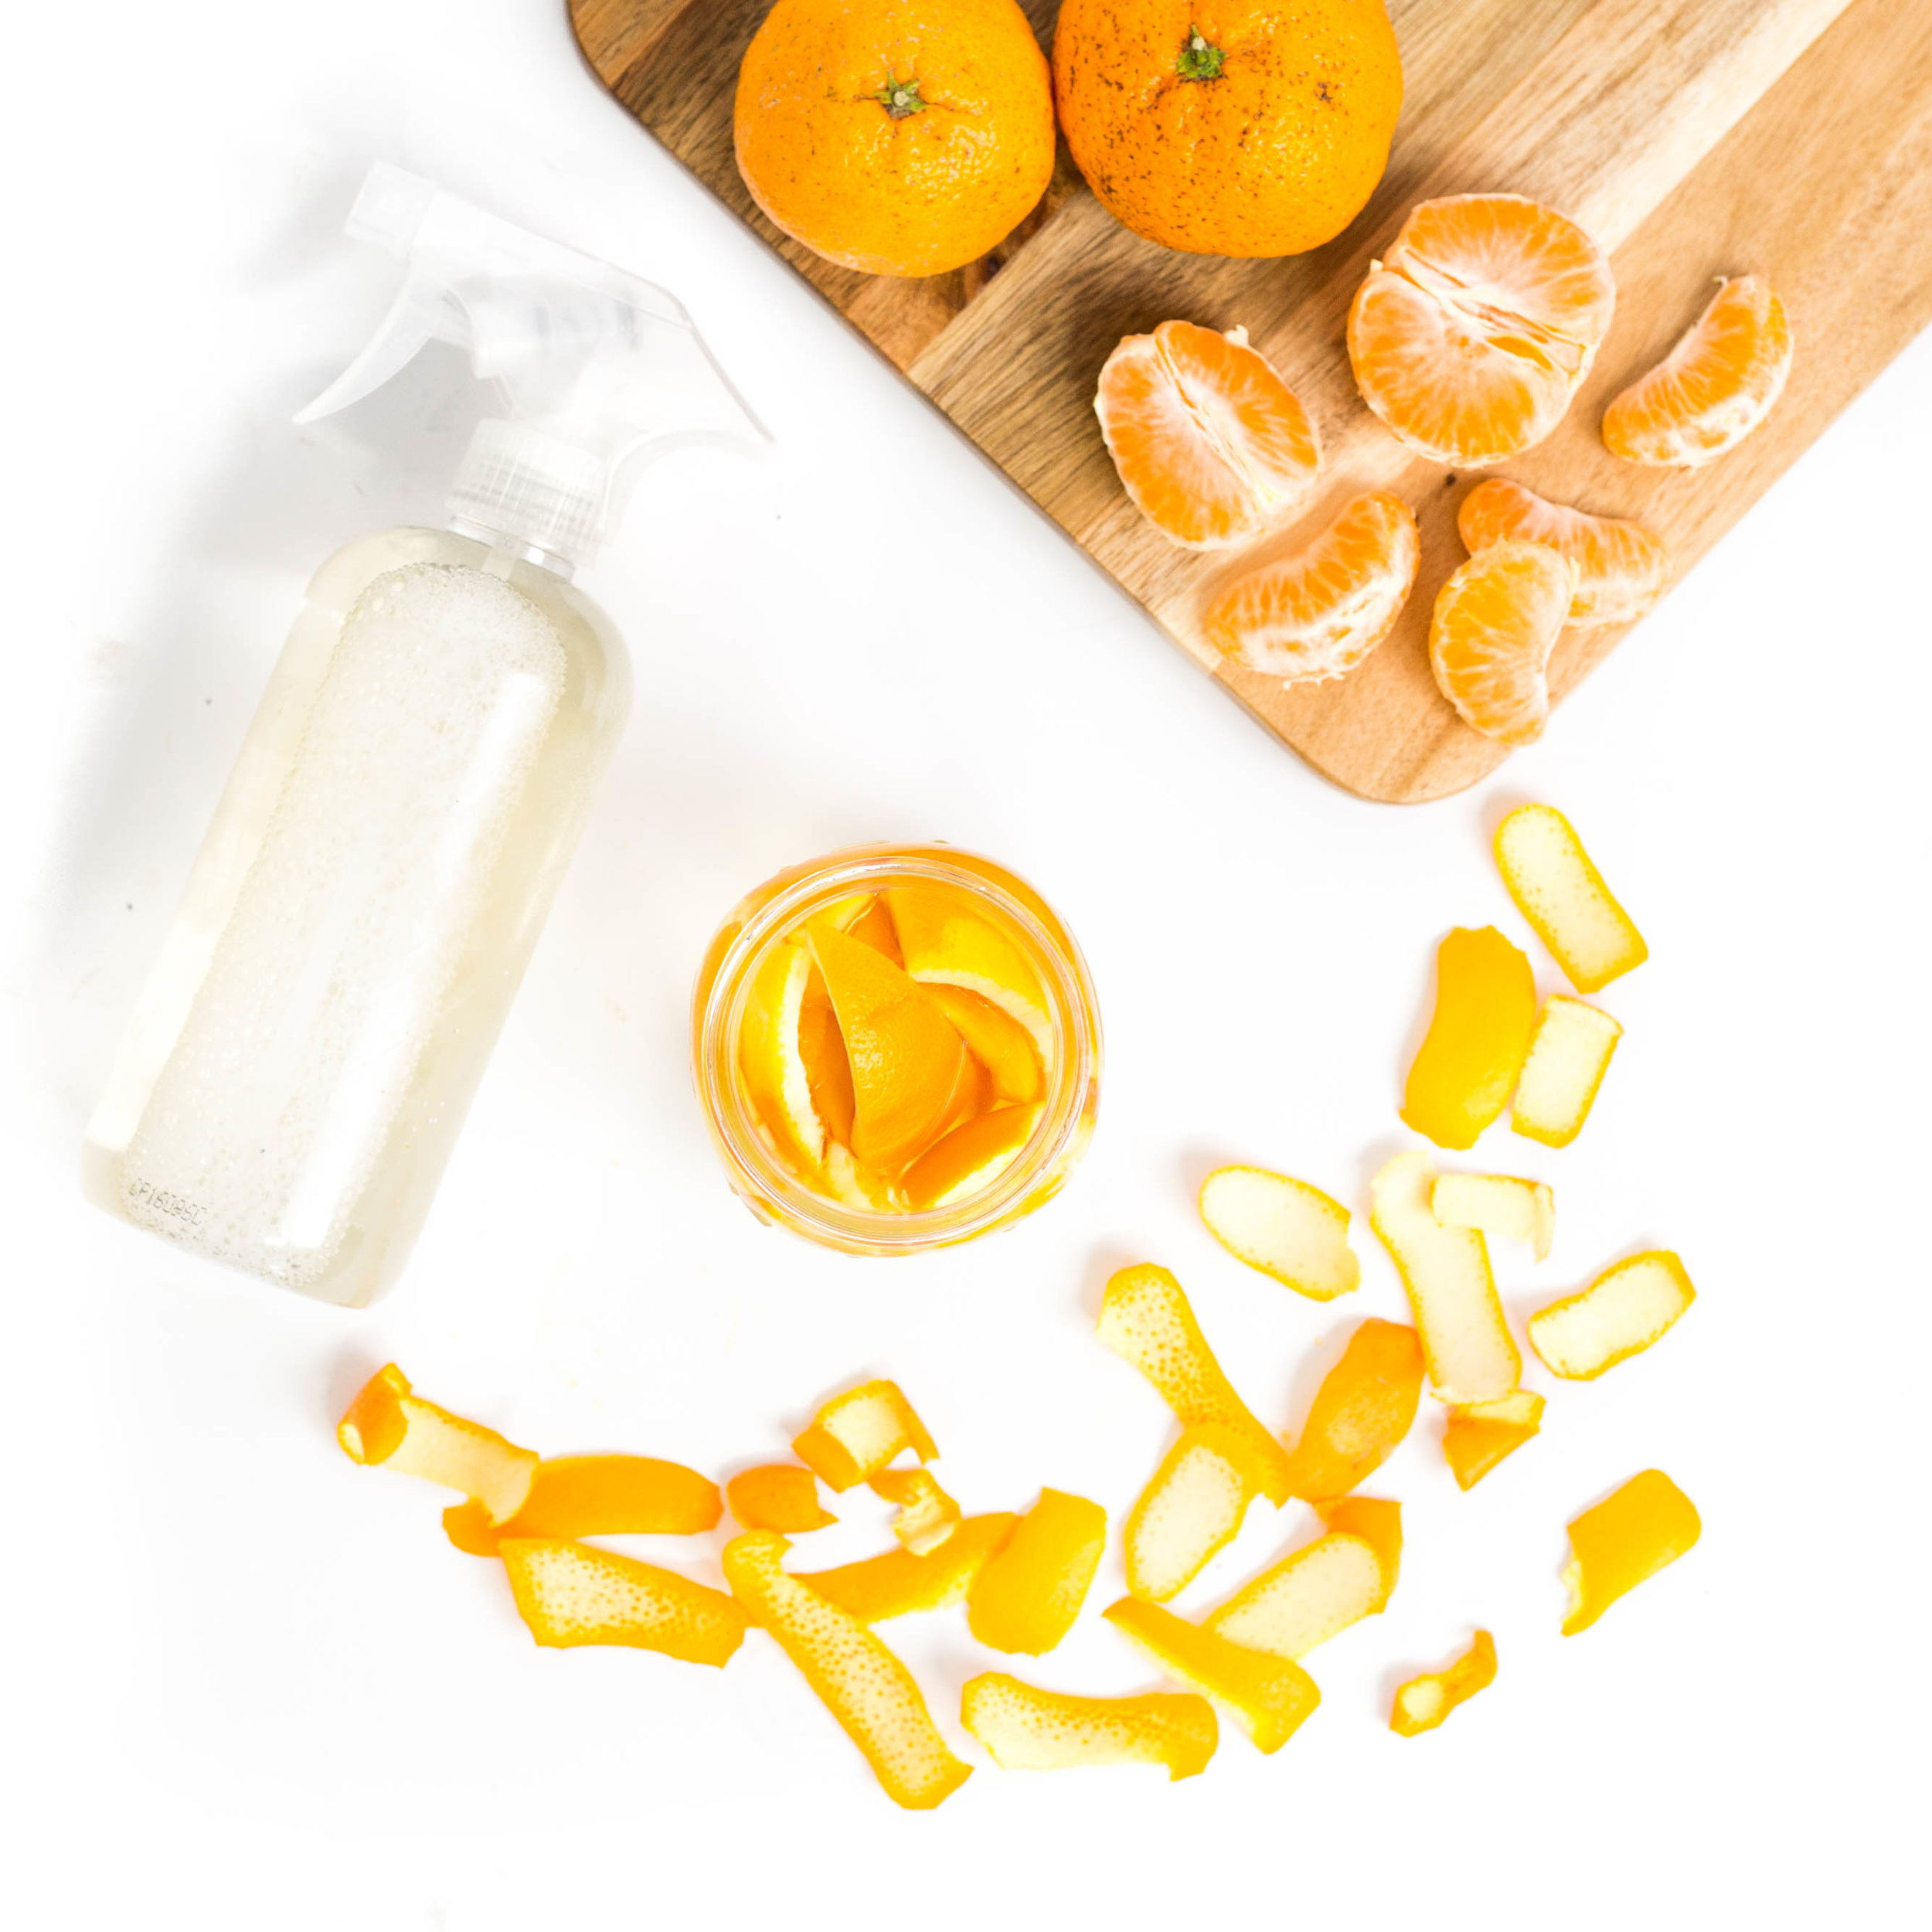 Turn Citrus Peels Into a Non-toxic Kitchen Cleaner - Imperfect Blog